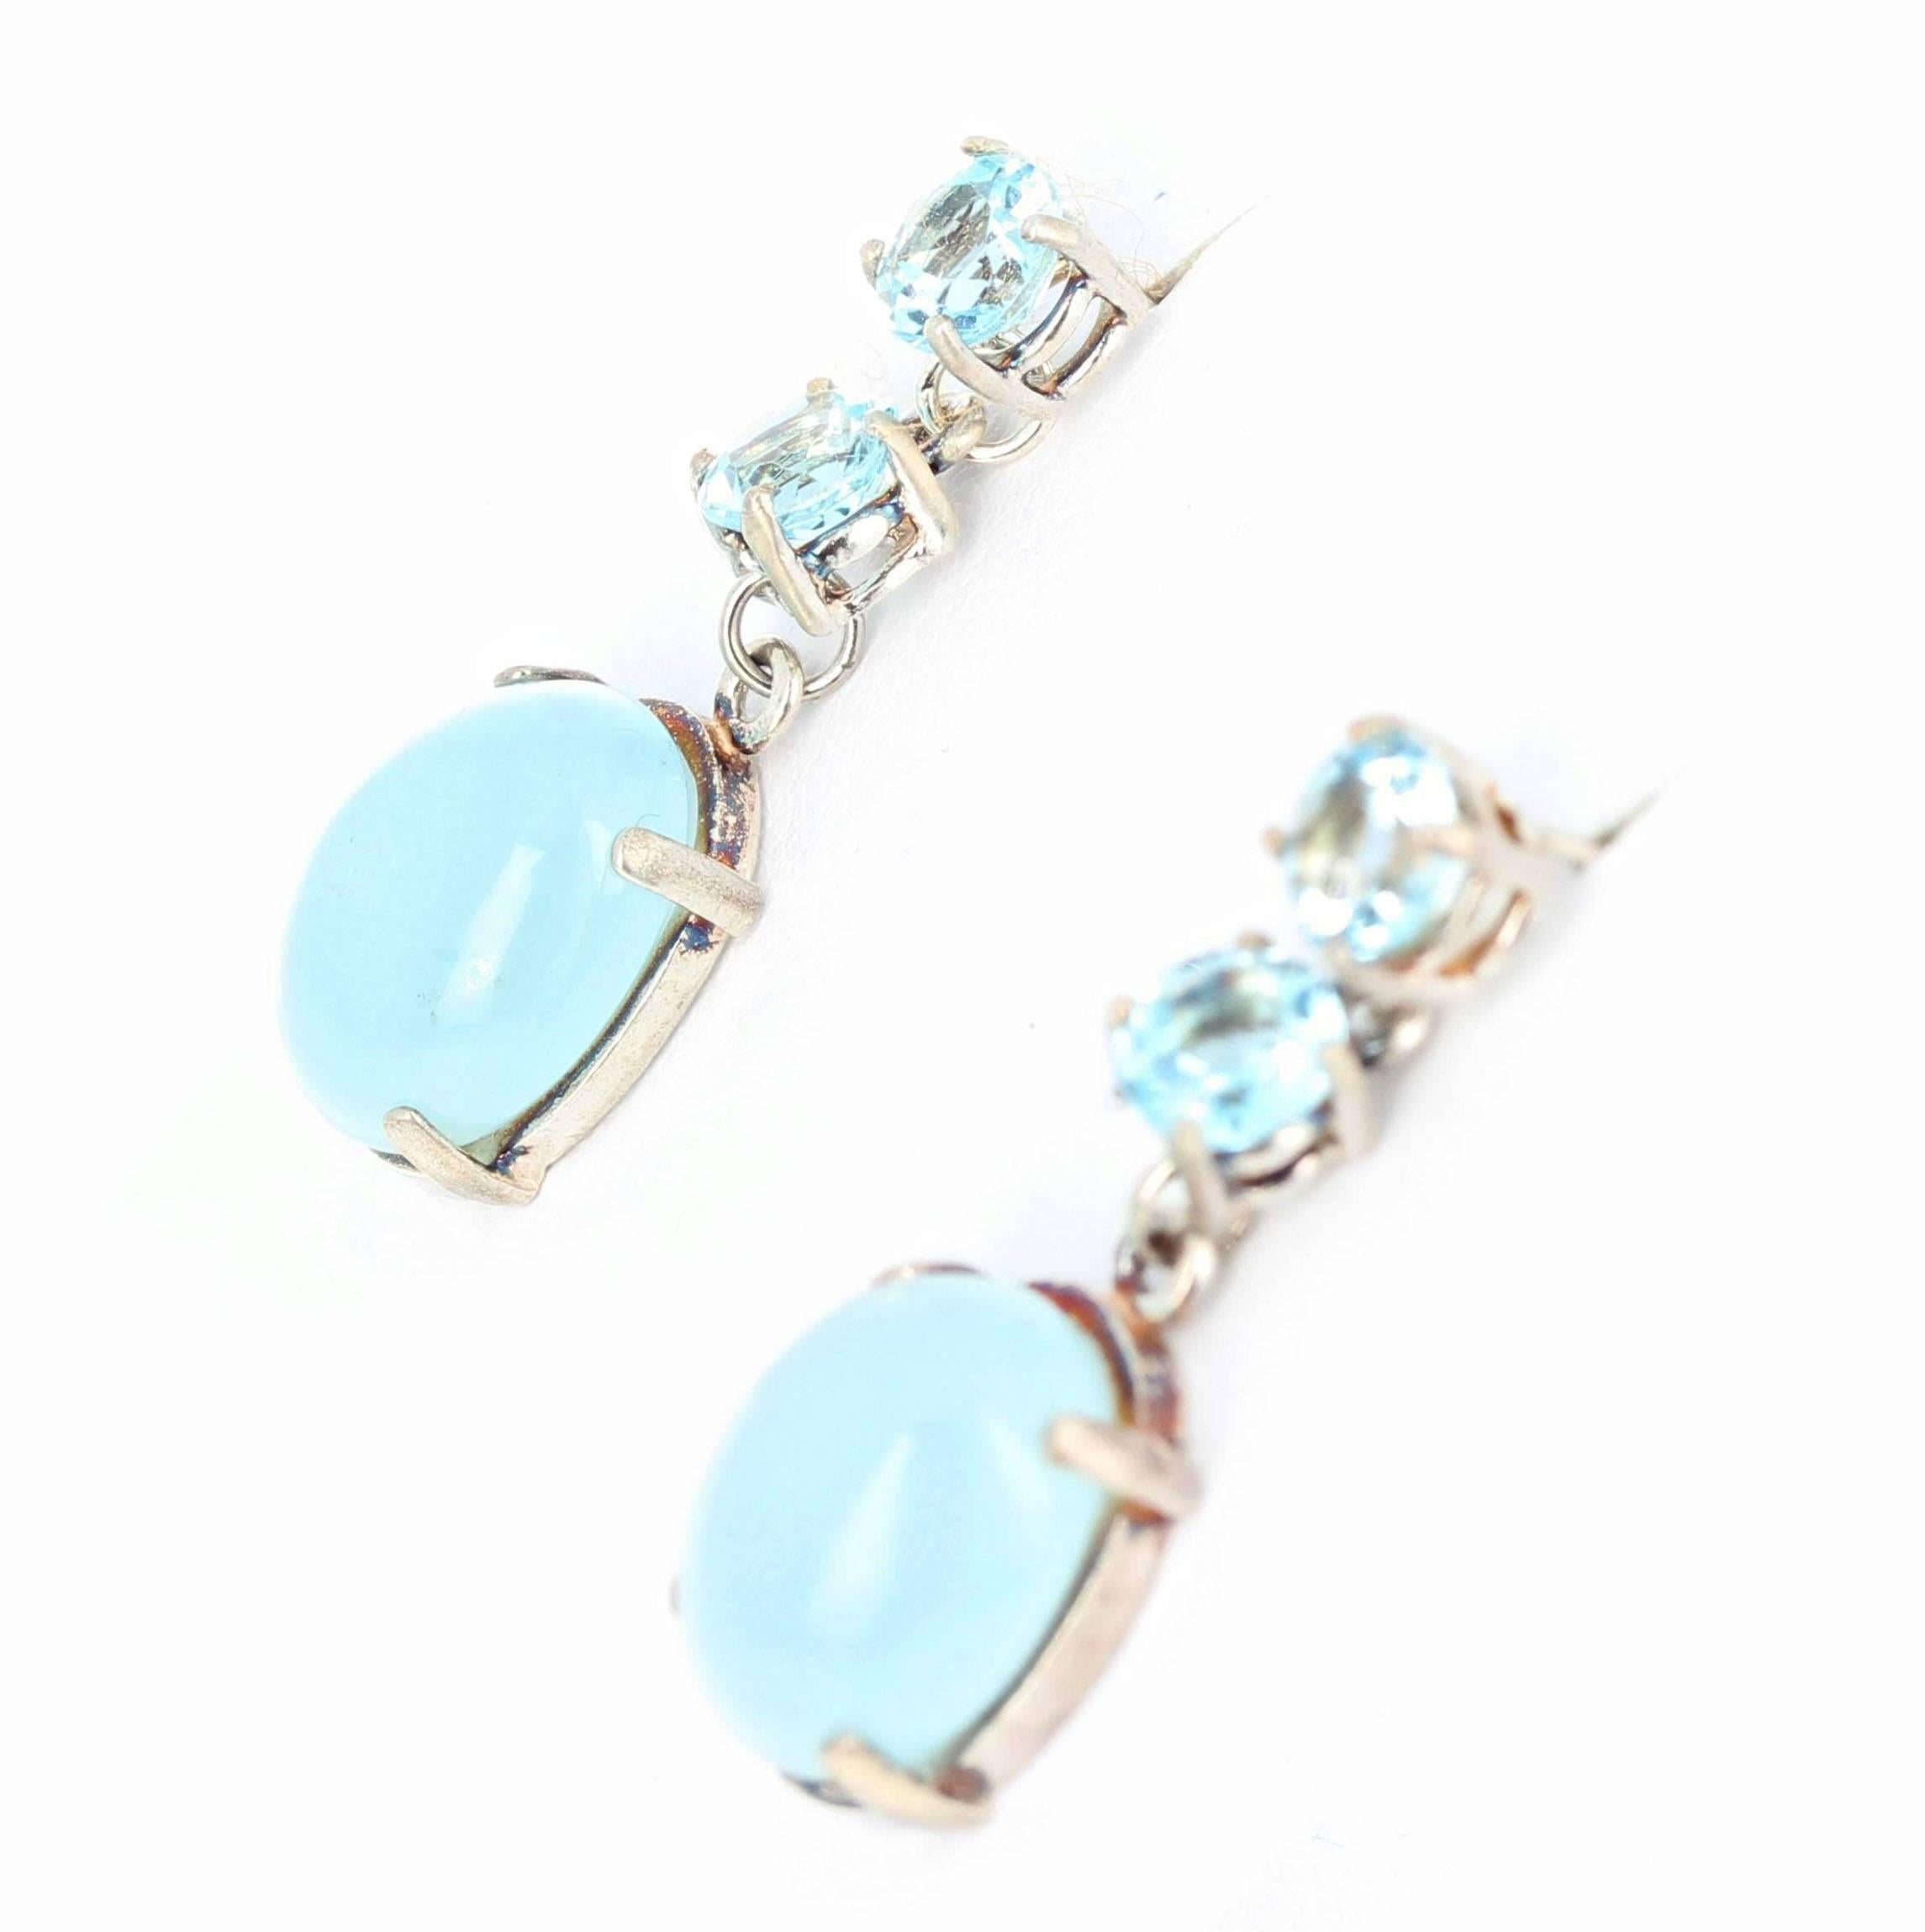 Hadmade Unique Blue Topaz and Aquamarine Sterling Silver Dangle Stud Earrings 1